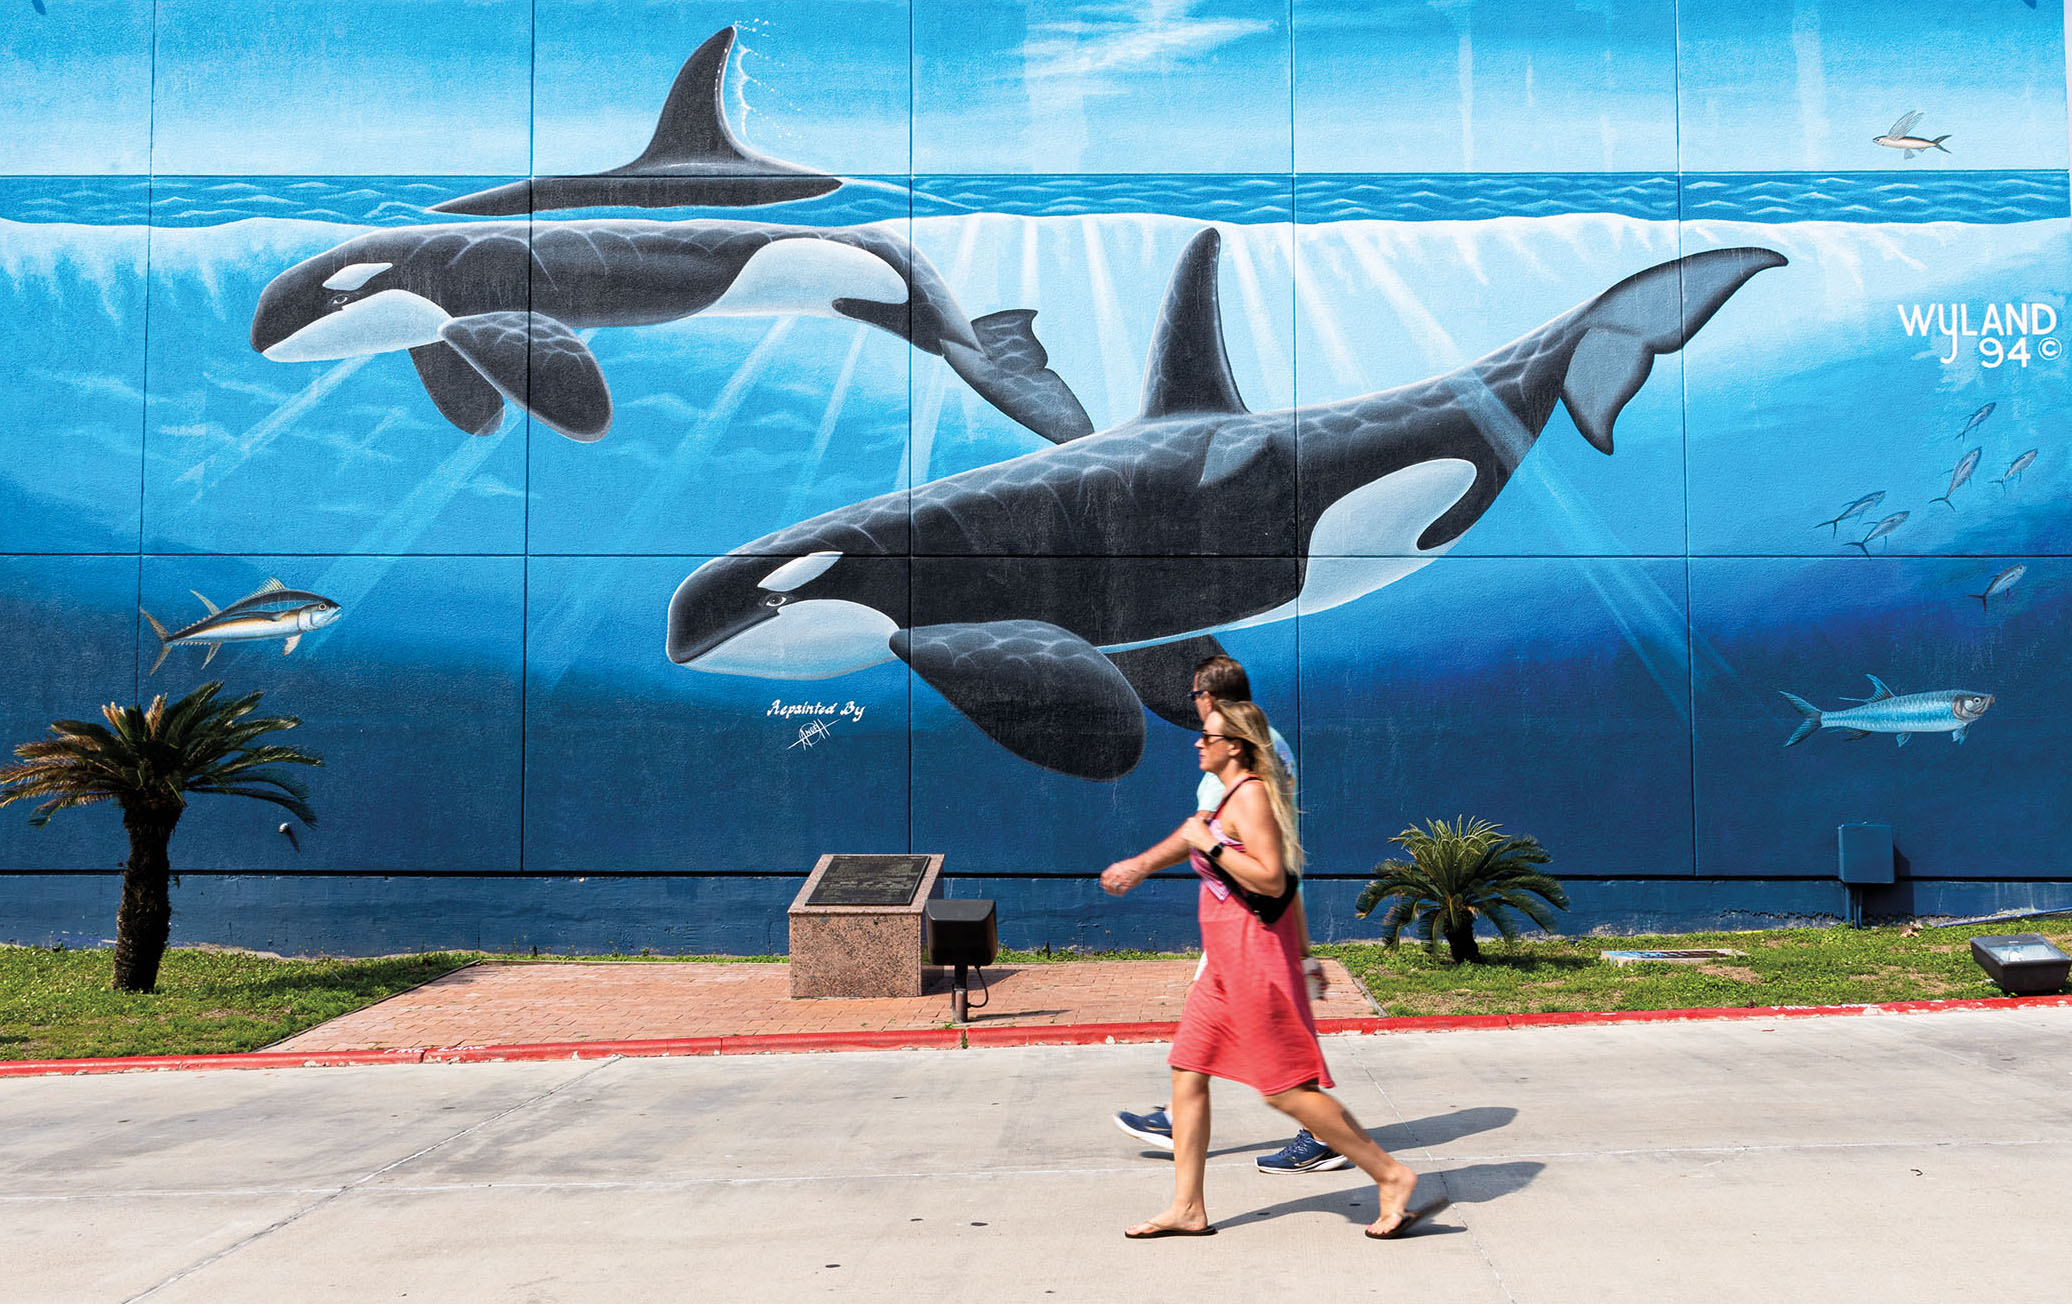 A couple walks in front of a large mural of several orcas swimming in deep blue water